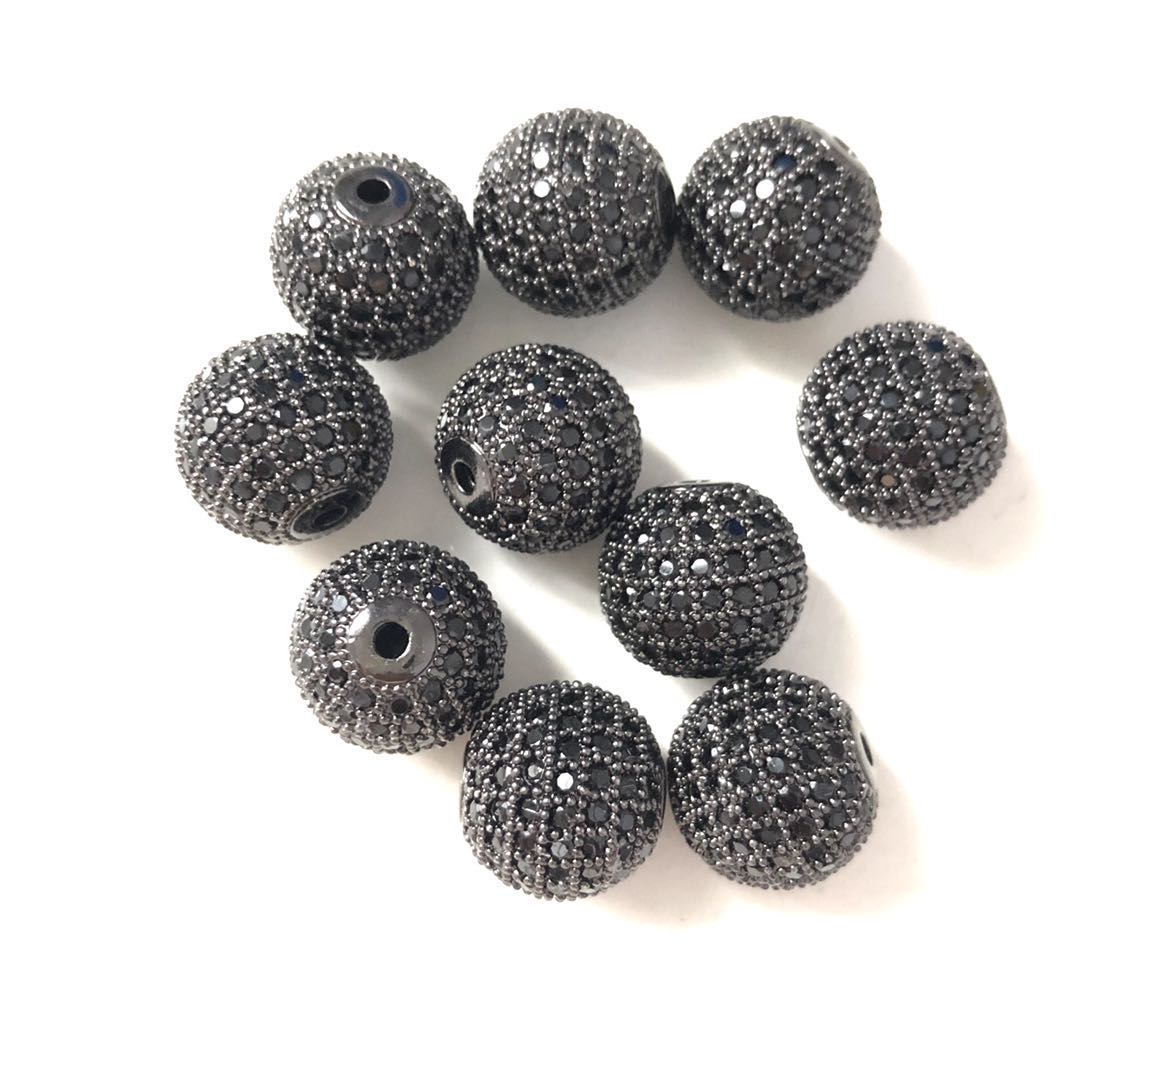 50pcs/lot 12mm Black CZ Paved Ball Spacers Black Wholesale 12mm Beads Charms Beads Beyond